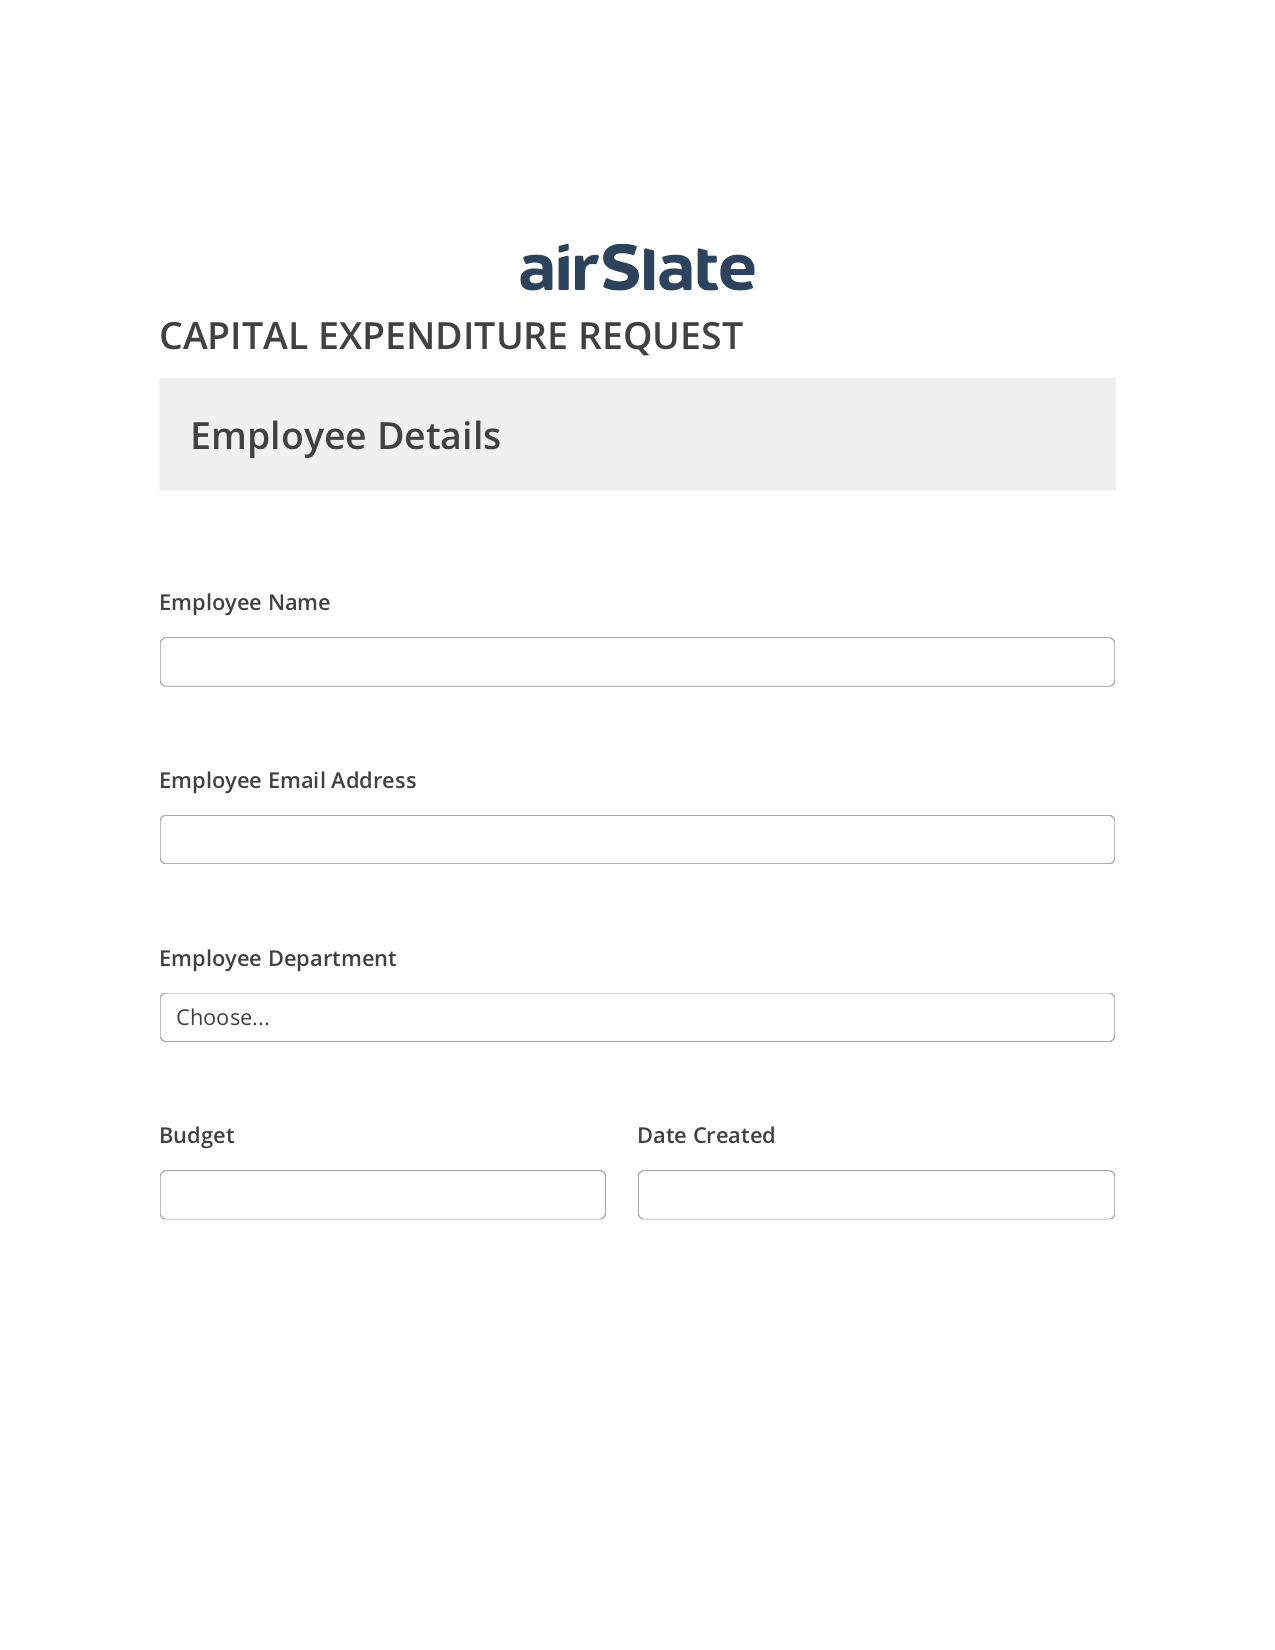 Capital Expenditure Request Approval Workflow Pre-fill from Litmos bot, Lock the Slate Bot, Export to Salesforce